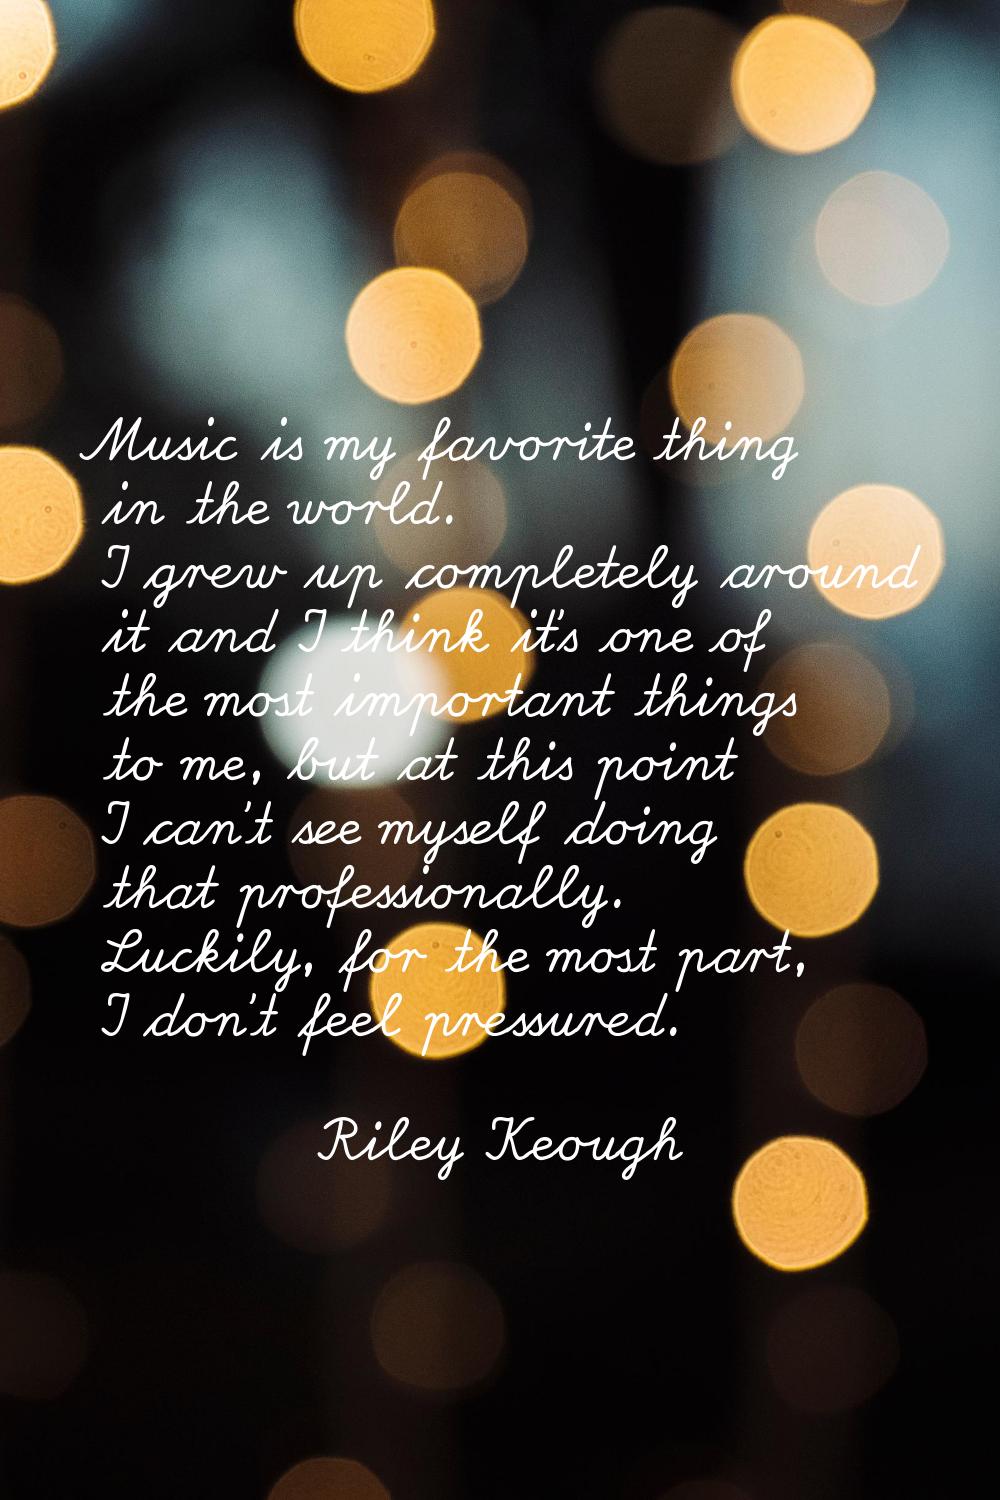 Music is my favorite thing in the world. I grew up completely around it and I think it's one of the